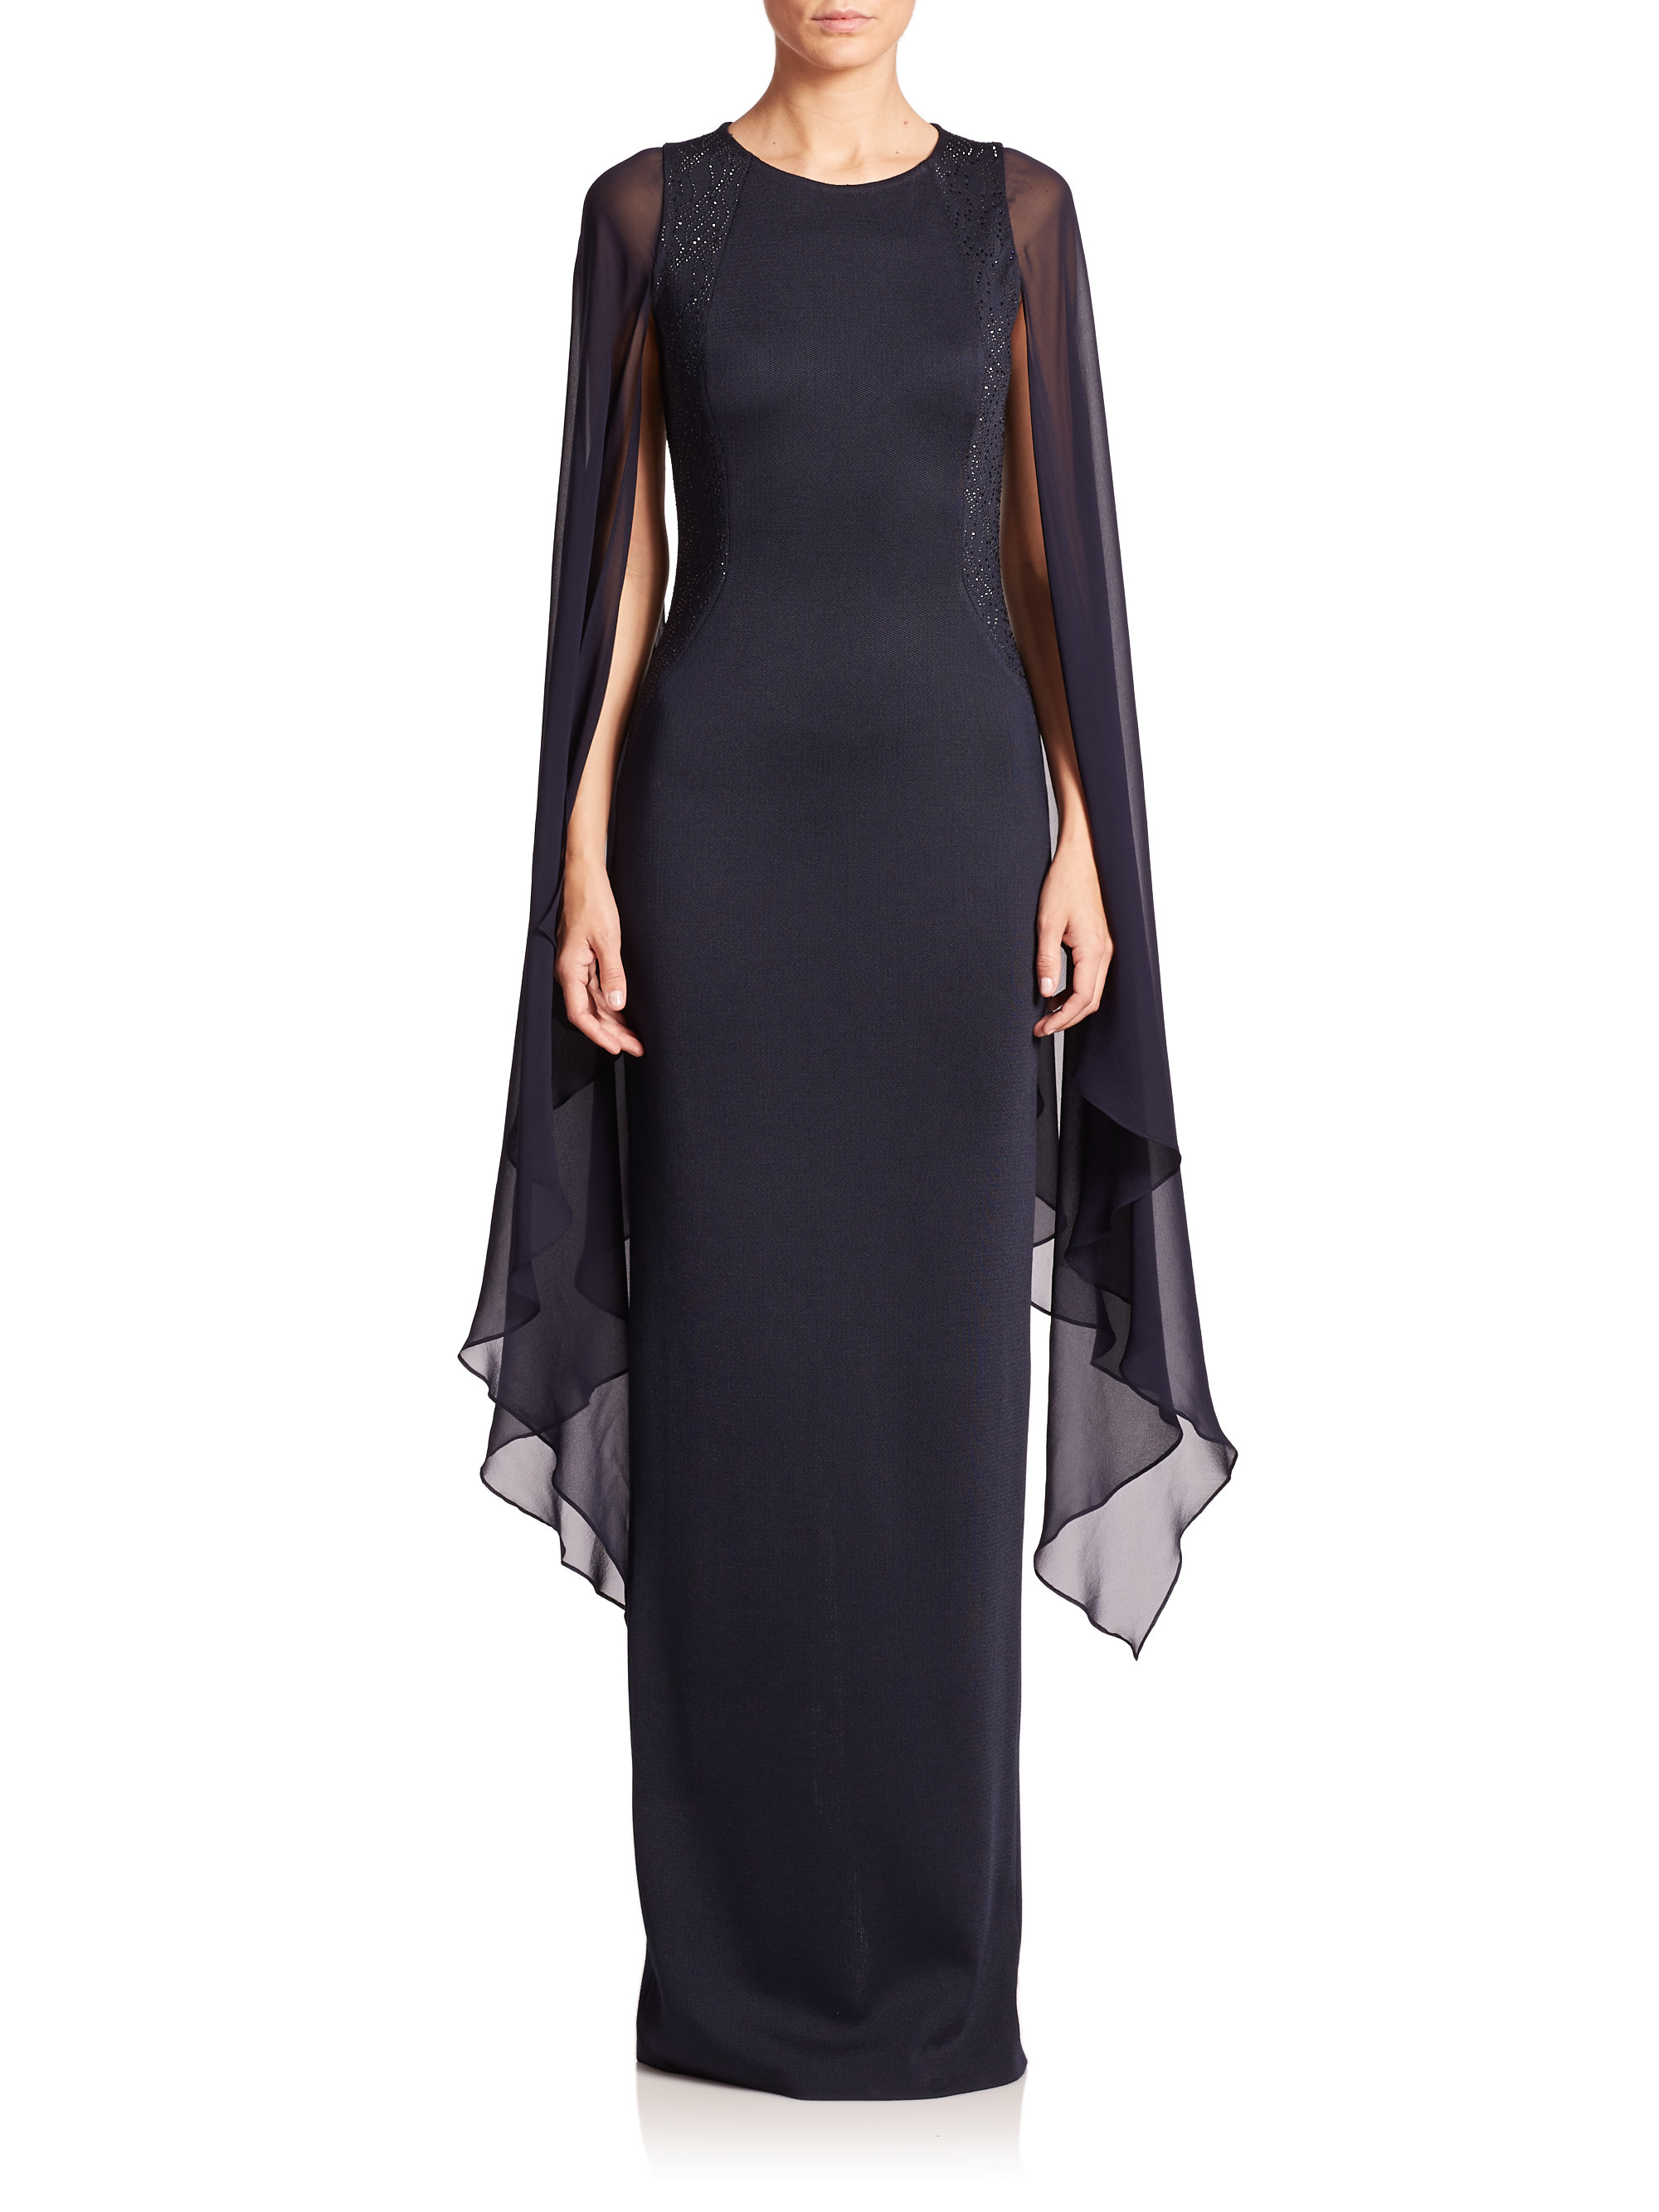 St John Cap Sleeve Milano Knit Gown In Blue Lyst throughout Famous St John Formal Wear – Top Design Source